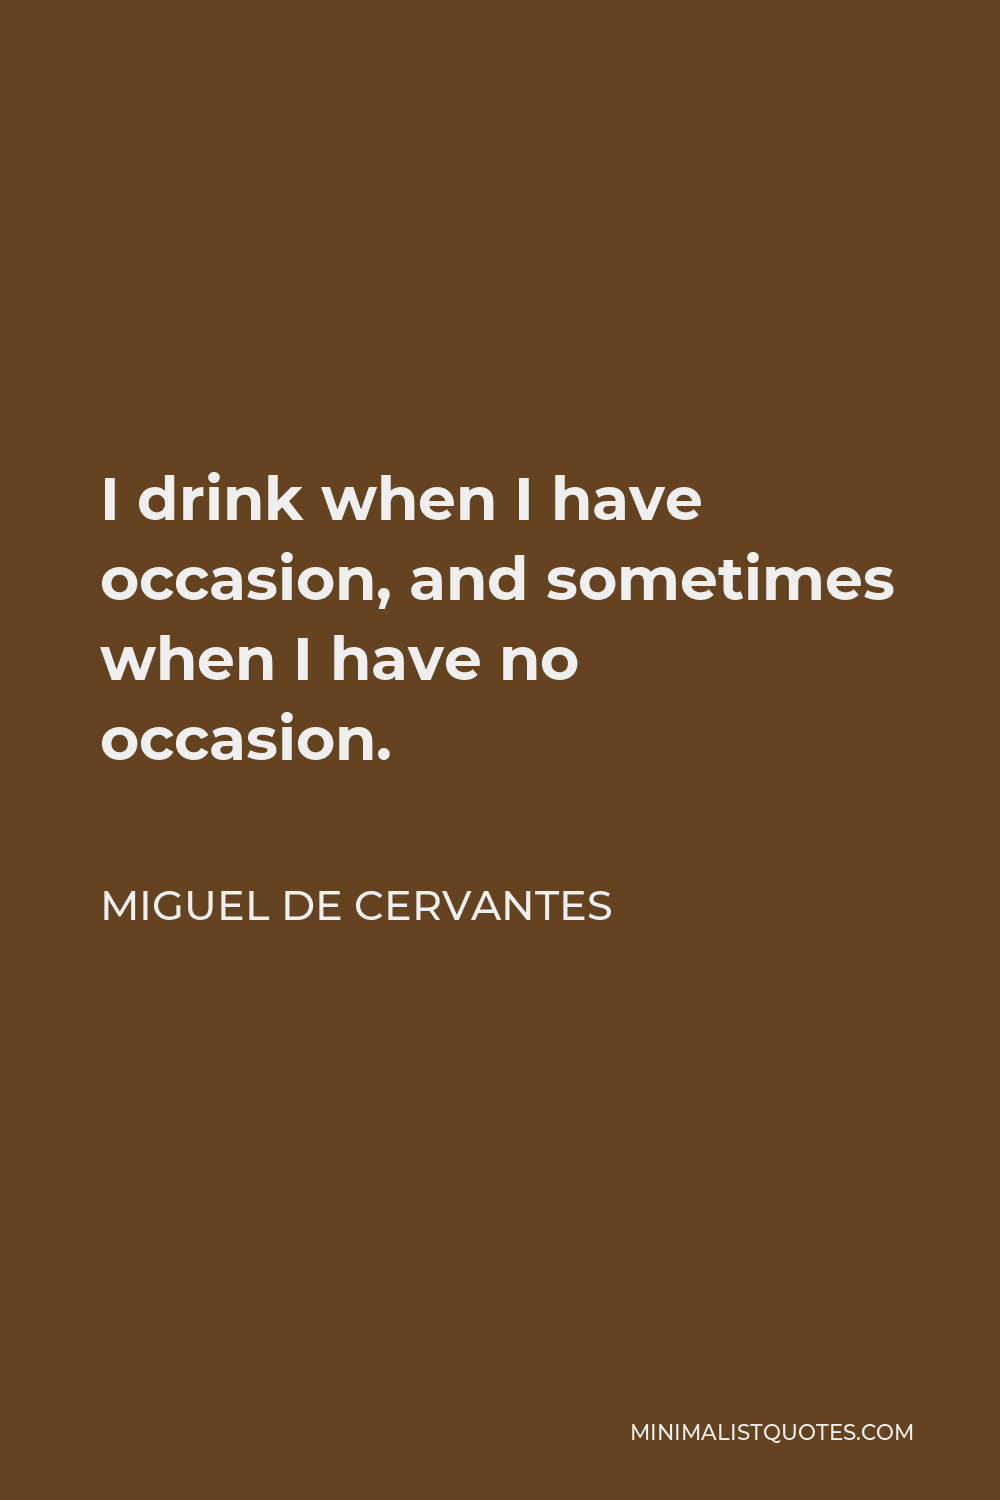 Miguel de Cervantes Quote - I drink when I have occasion, and sometimes when I have no occasion.